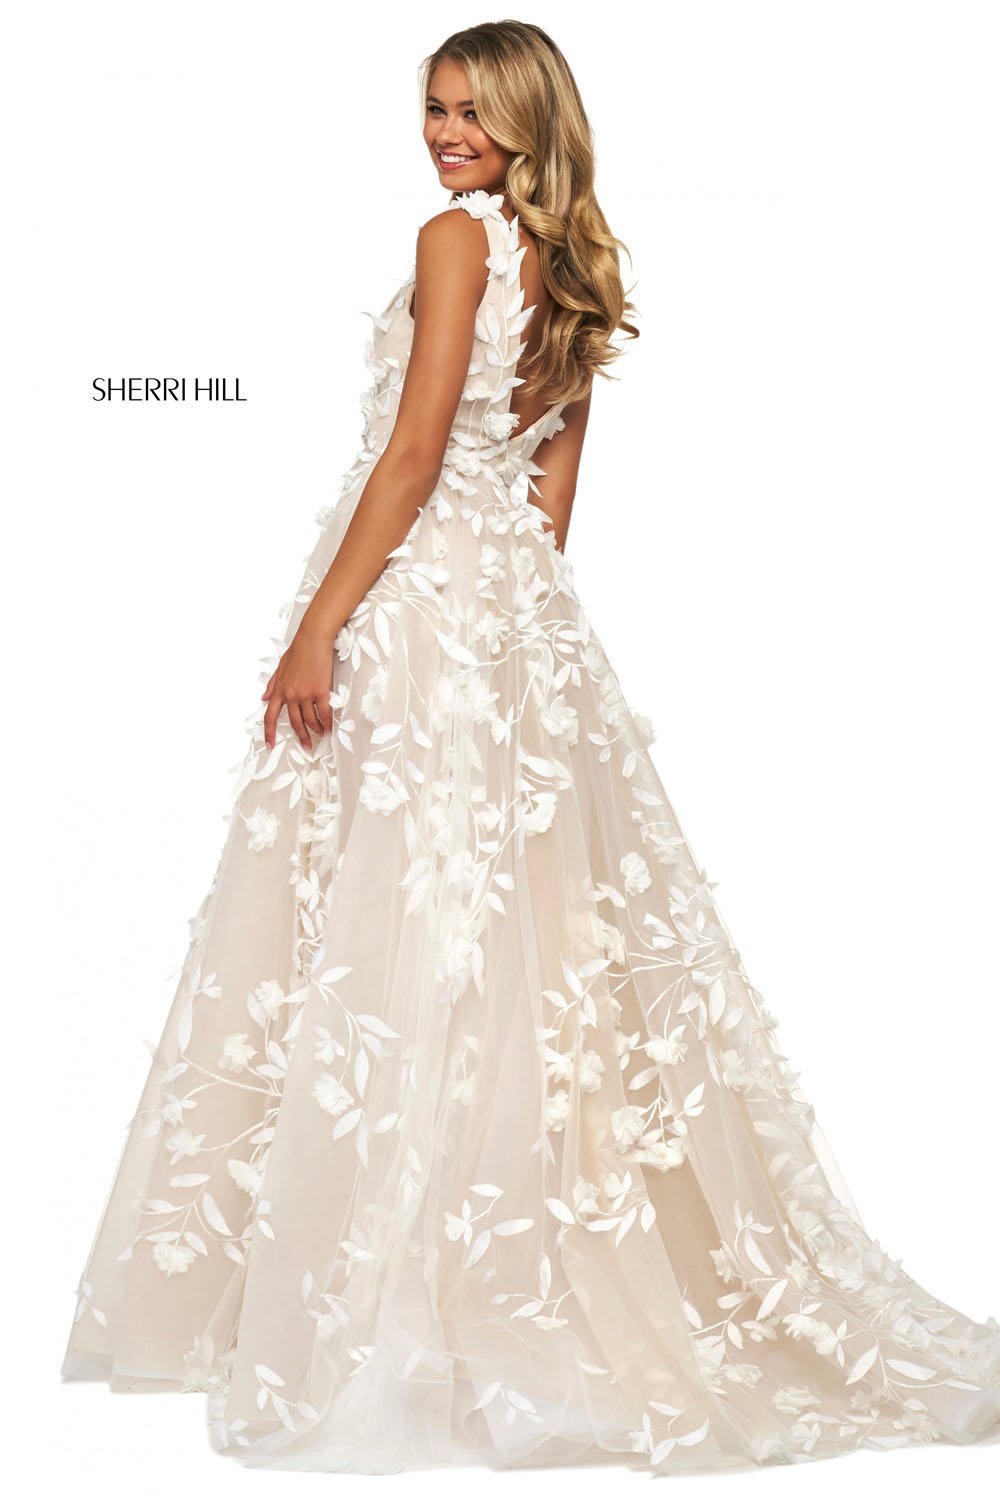 Sherri Hill 53770 dress images in these colors: Ivory Nude.